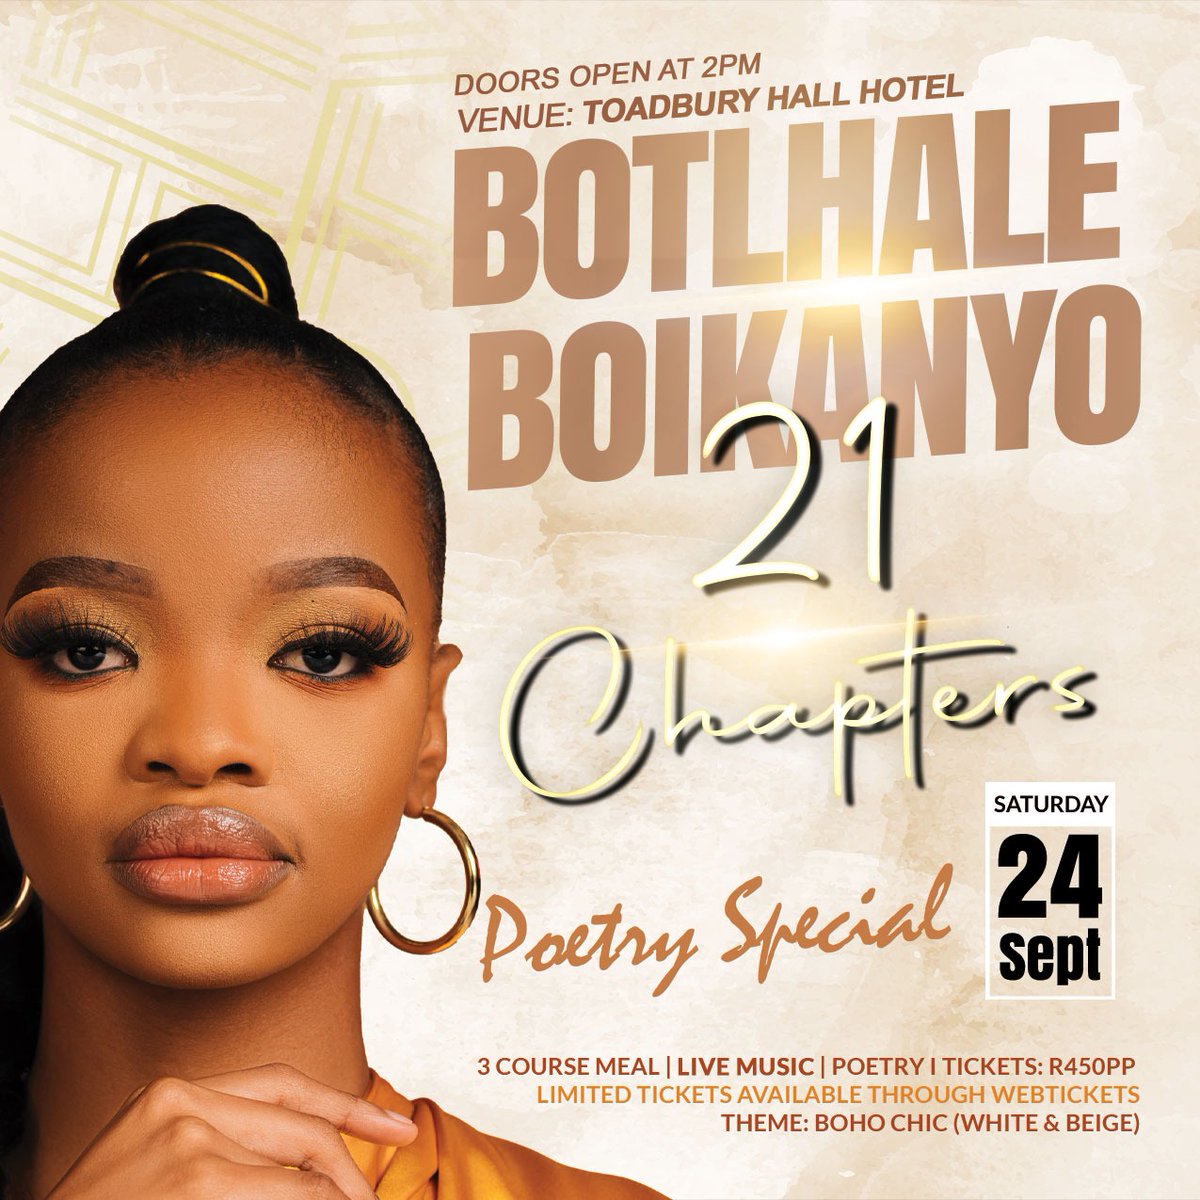 Ladies and Gentlemen #21chapters by @Botlhale__ . Limited tickets available at webtickets and moving fast. Click link below to purchase your tickets webtickets.co.za/v2/Event.aspx?…